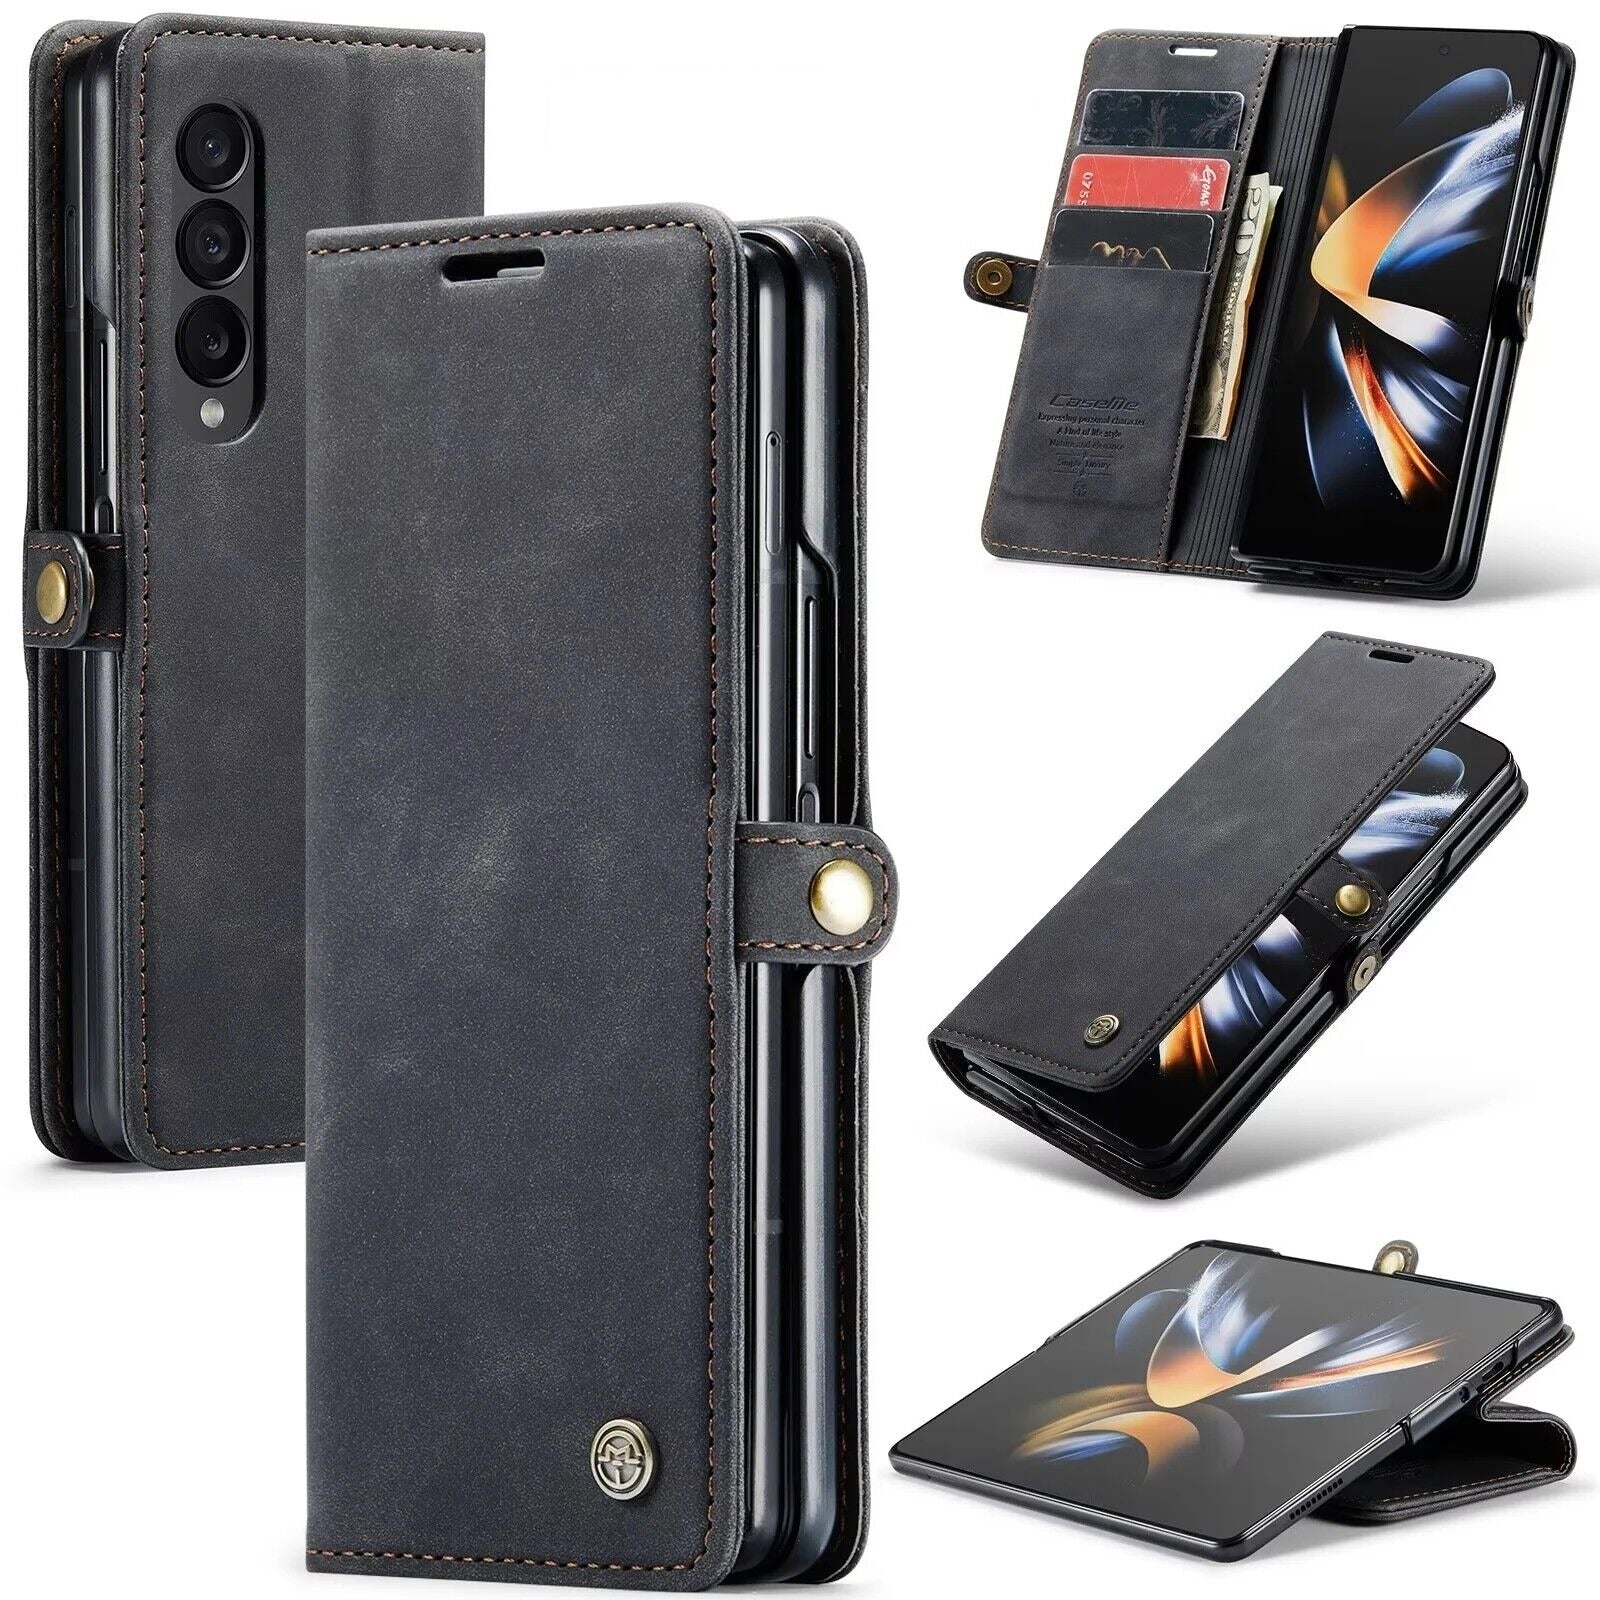 [FREE SHIPPING] CASEME RETRO LEATHER CASE FOR SAMSUNG Z FOLD 4 BOOK STYLE FLIP WALLET MAGNETIC COVER CARD SLOTS CASE FOR SAMSUNG Z-FOLD 4